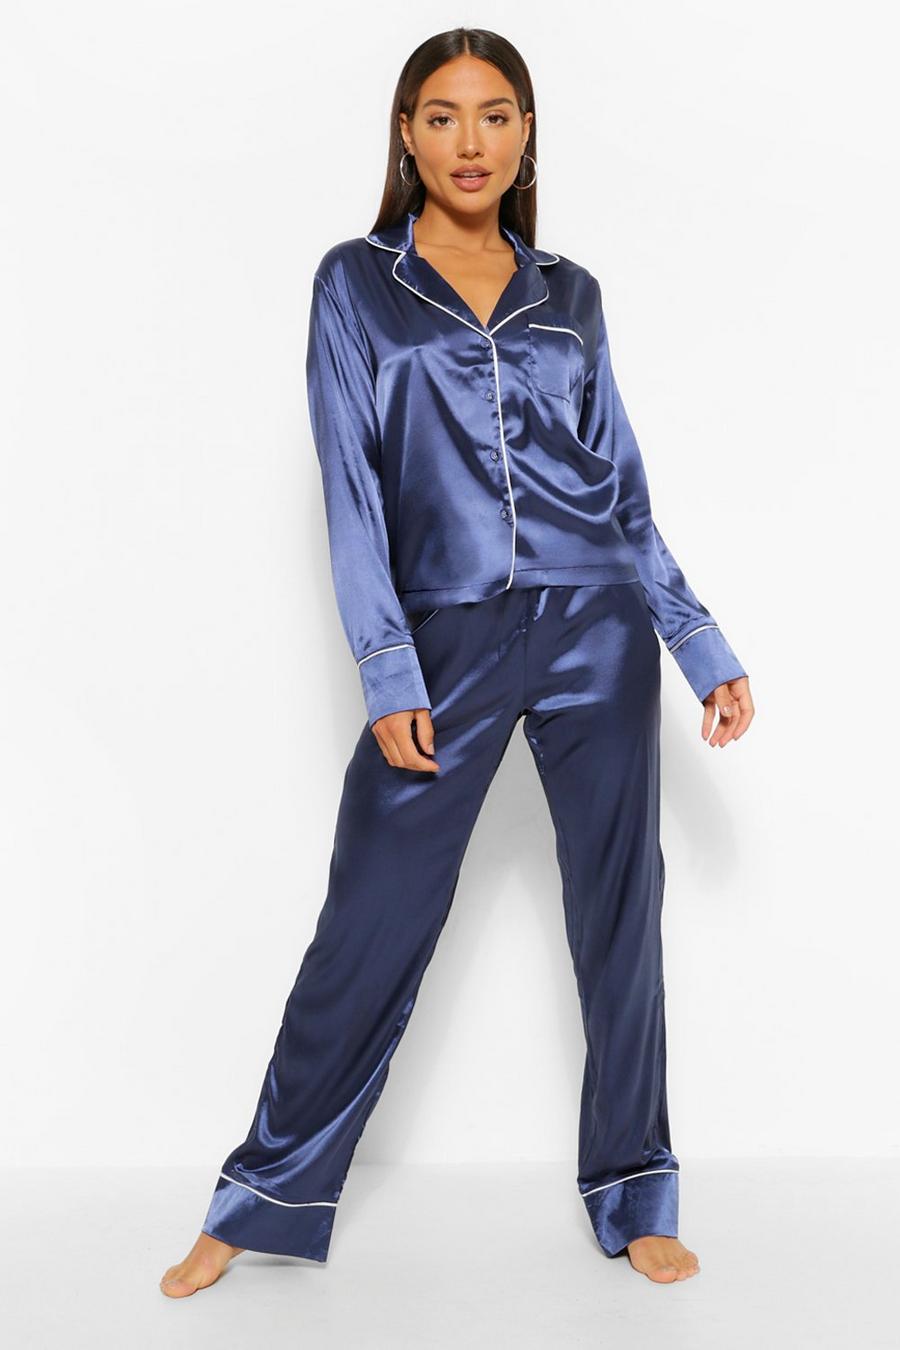 Navy azul marino It Was All A Dream Embroidered Satin PJ Set